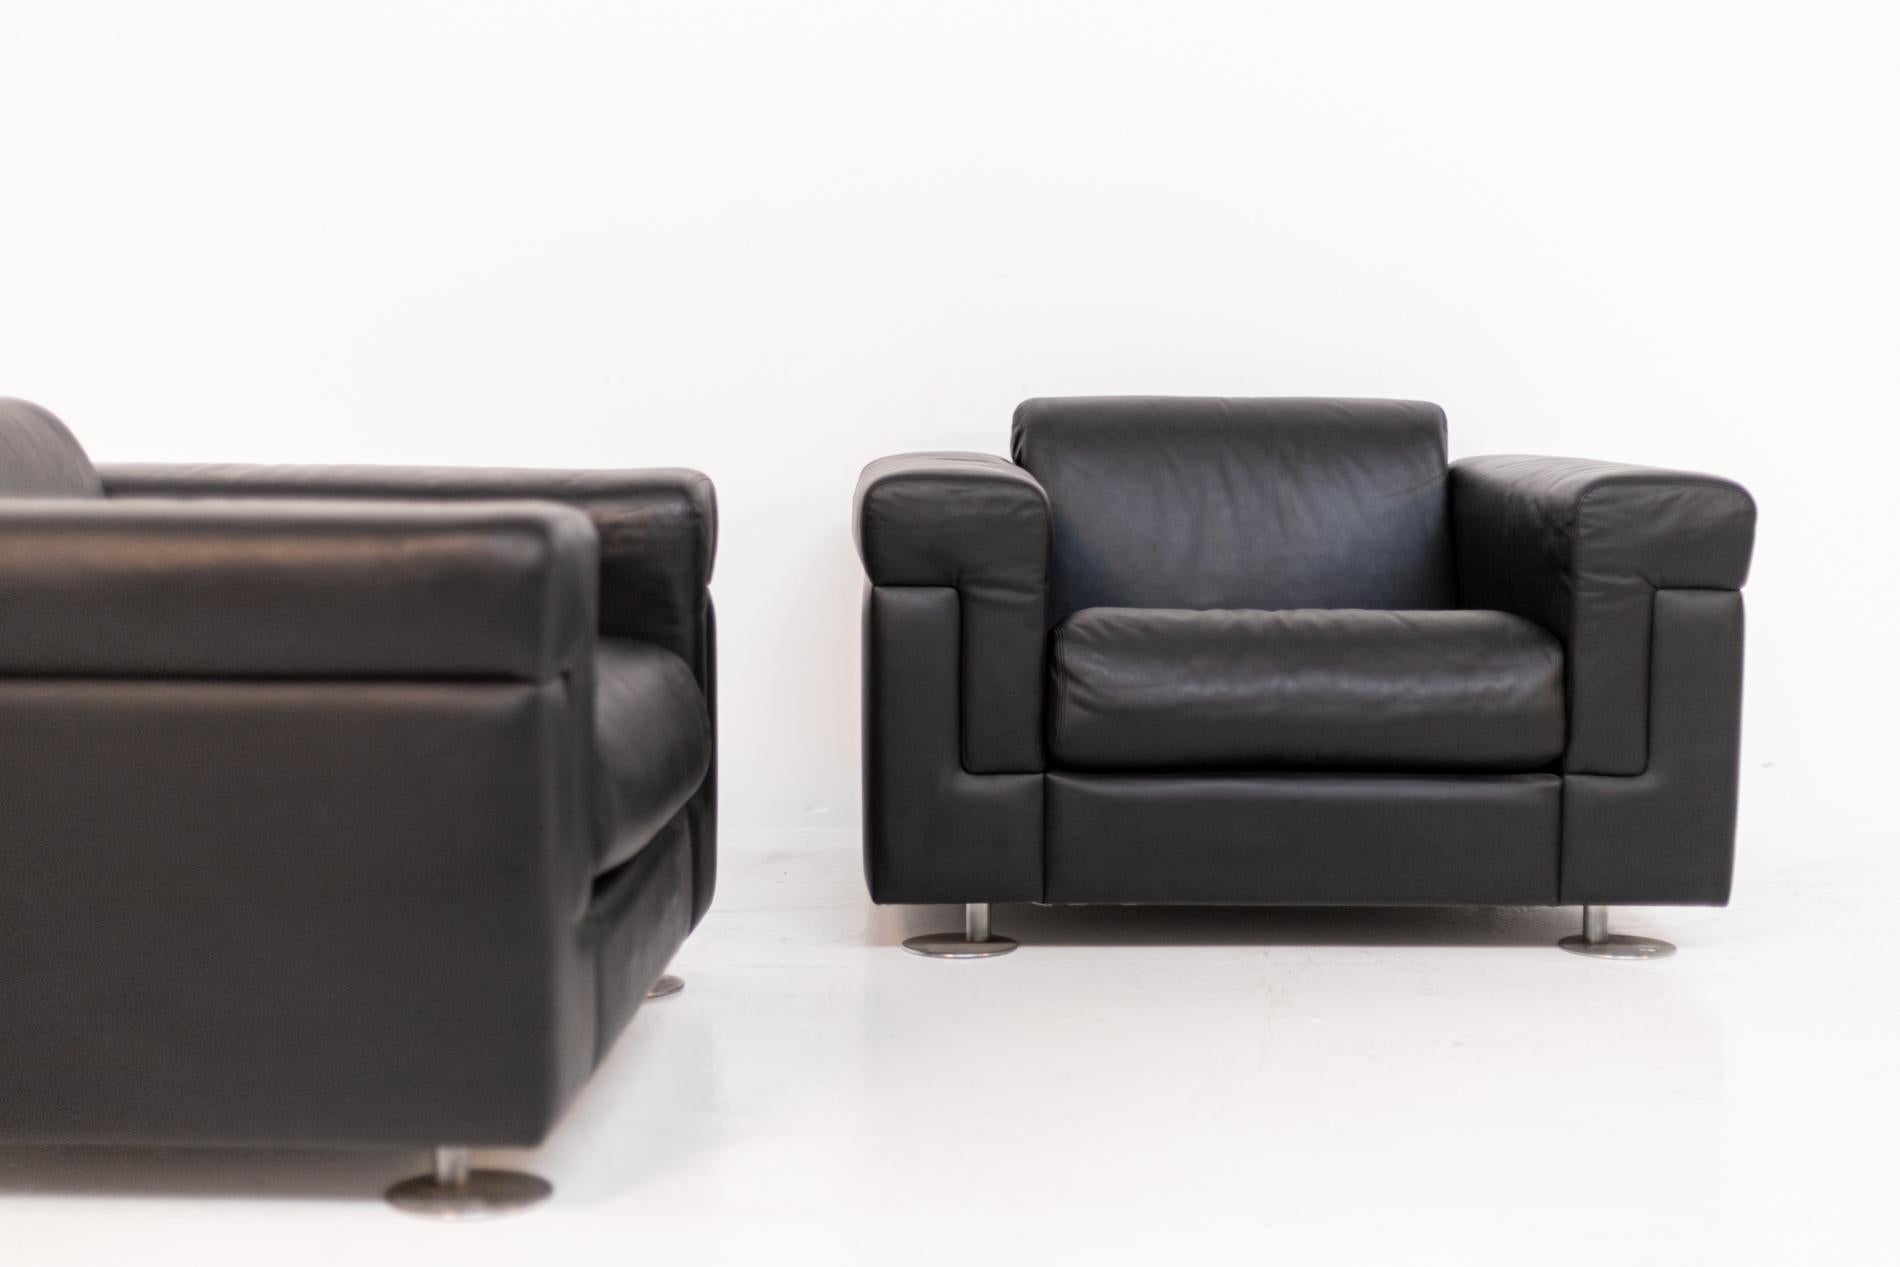 Pair of armchairs by Osvaldo Borsani for Tecno, model D120 in collaboration with Valeria Borsani and Alfredo Bonetti this model D120 was designed in 1966 on a Florida commission. The set is Rare living room model D120 made of black leather. The